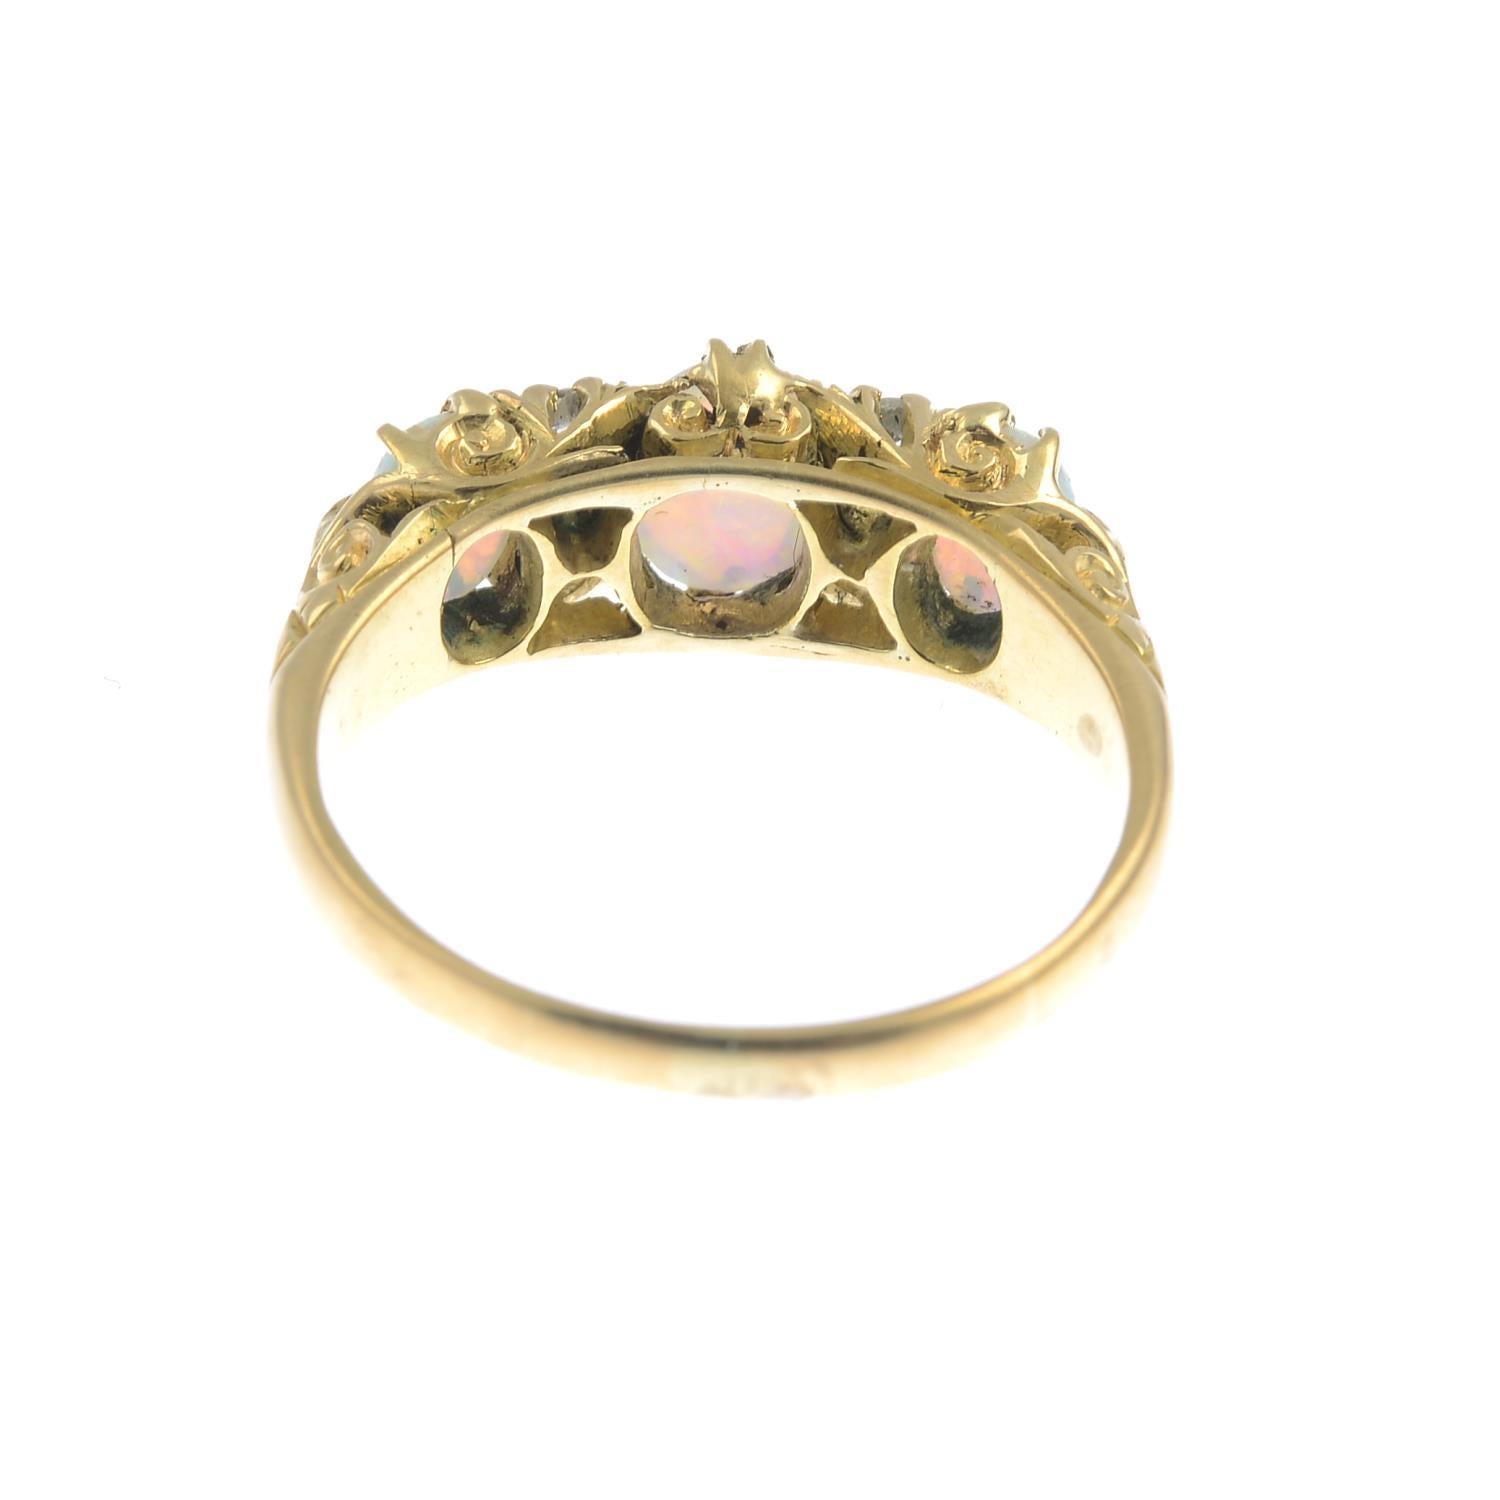 Edwardian Early 20th Century Gold Opal and Diamond Dress Ring